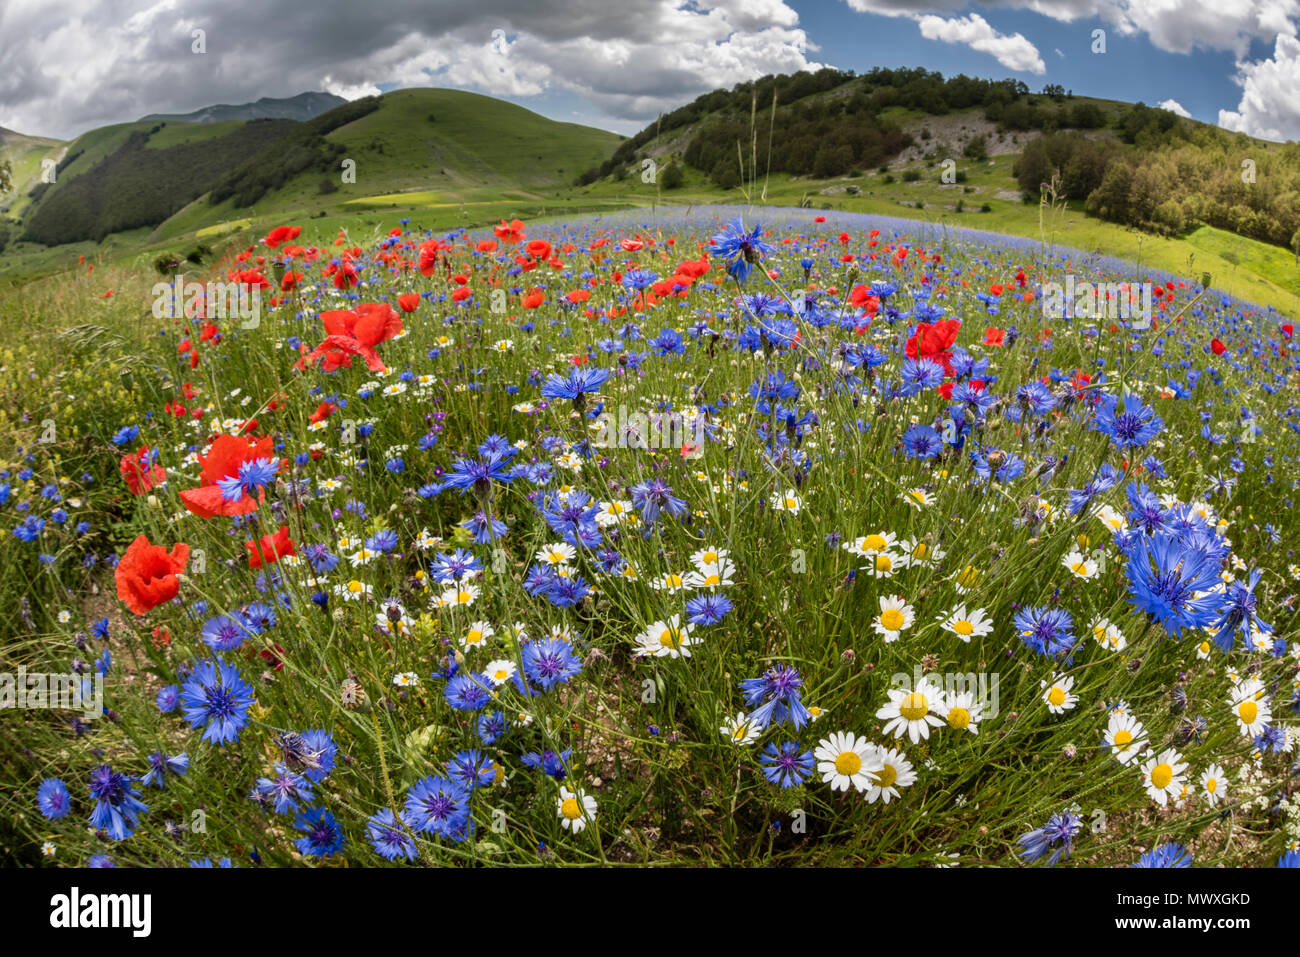 Wildflower meadow of poppies, ox-eye daisy and cornflower, Monte Sibillini Mountains, Piano Grande, Umbria, Italy, Europe Stock Photo